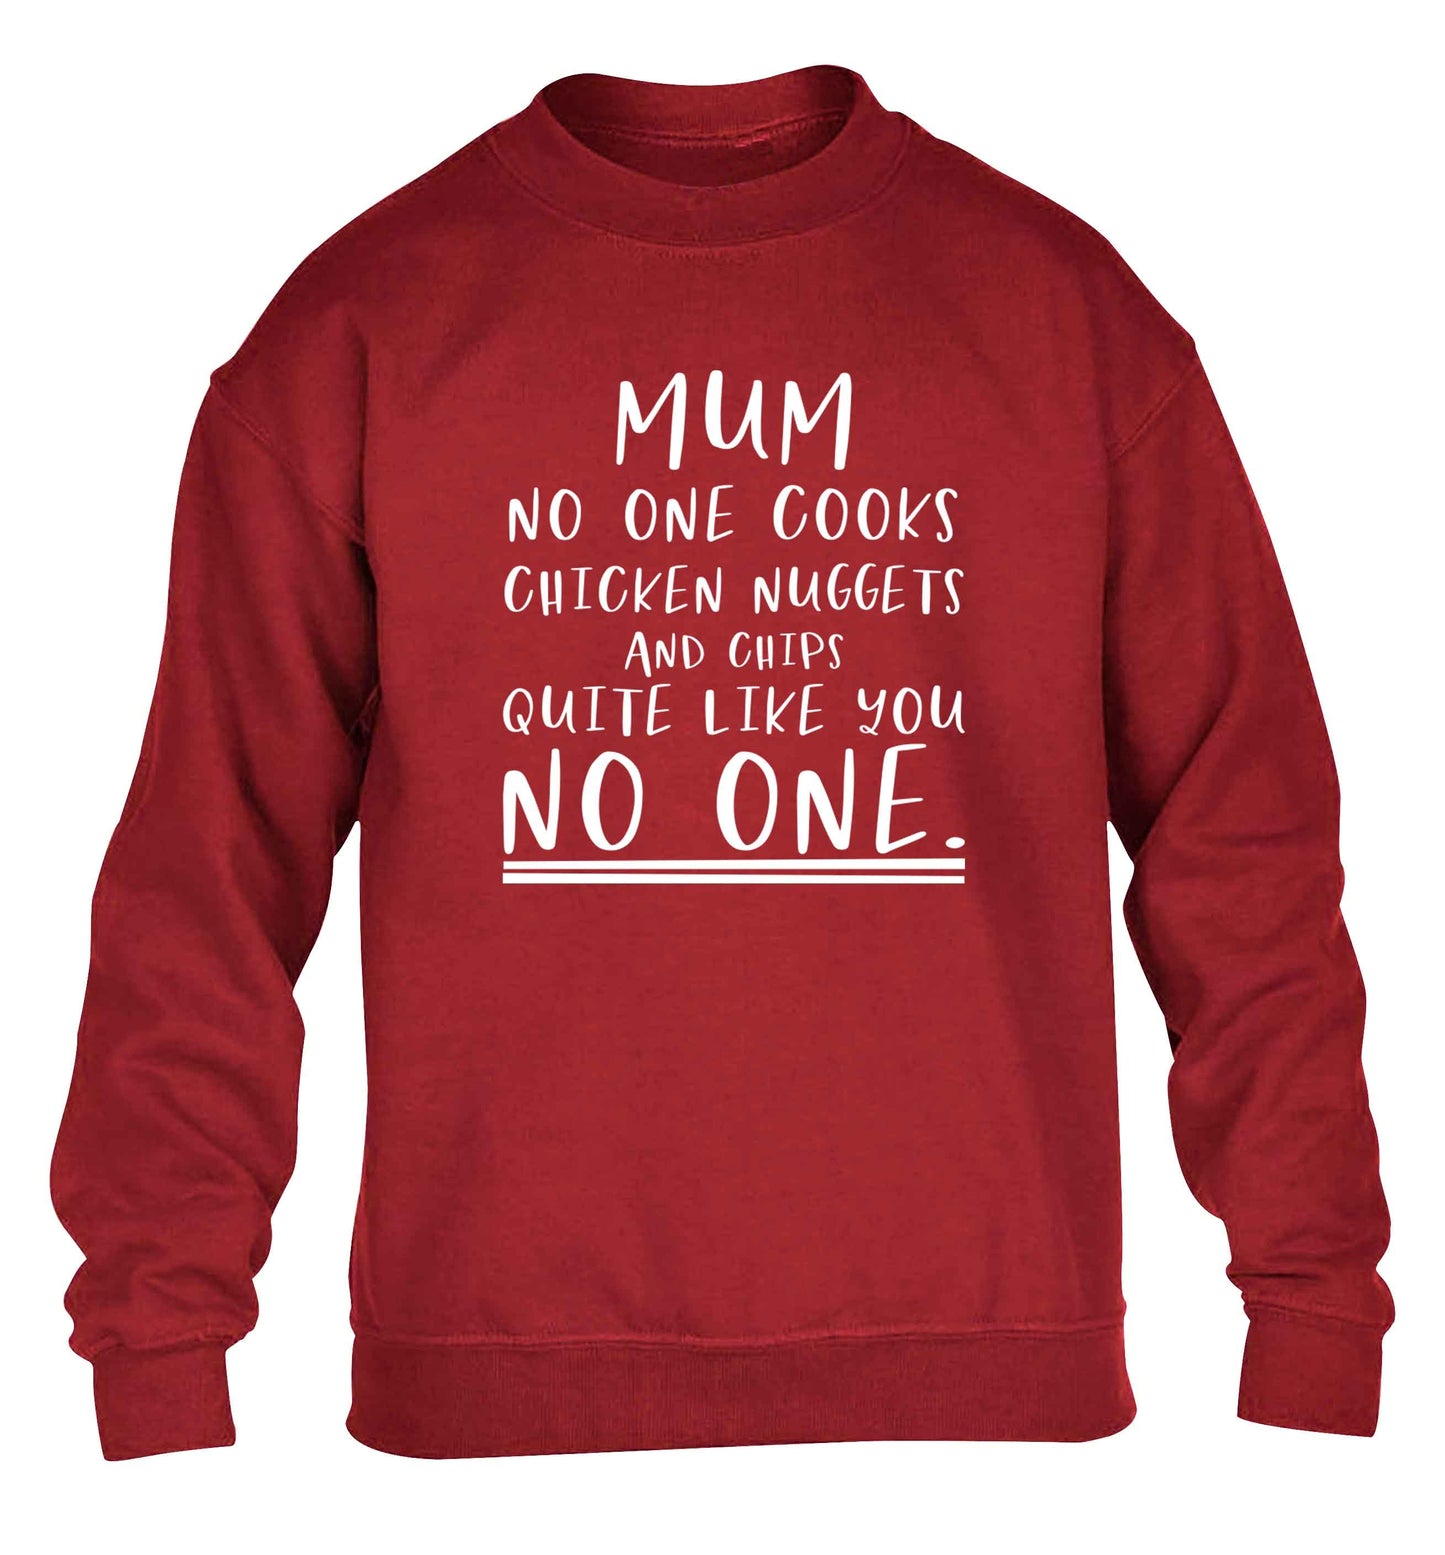 Super funny sassy gift for mother's day or birthday!  Mum no one cooks chicken nuggets and chips like you no one children's grey sweater 12-13 Years